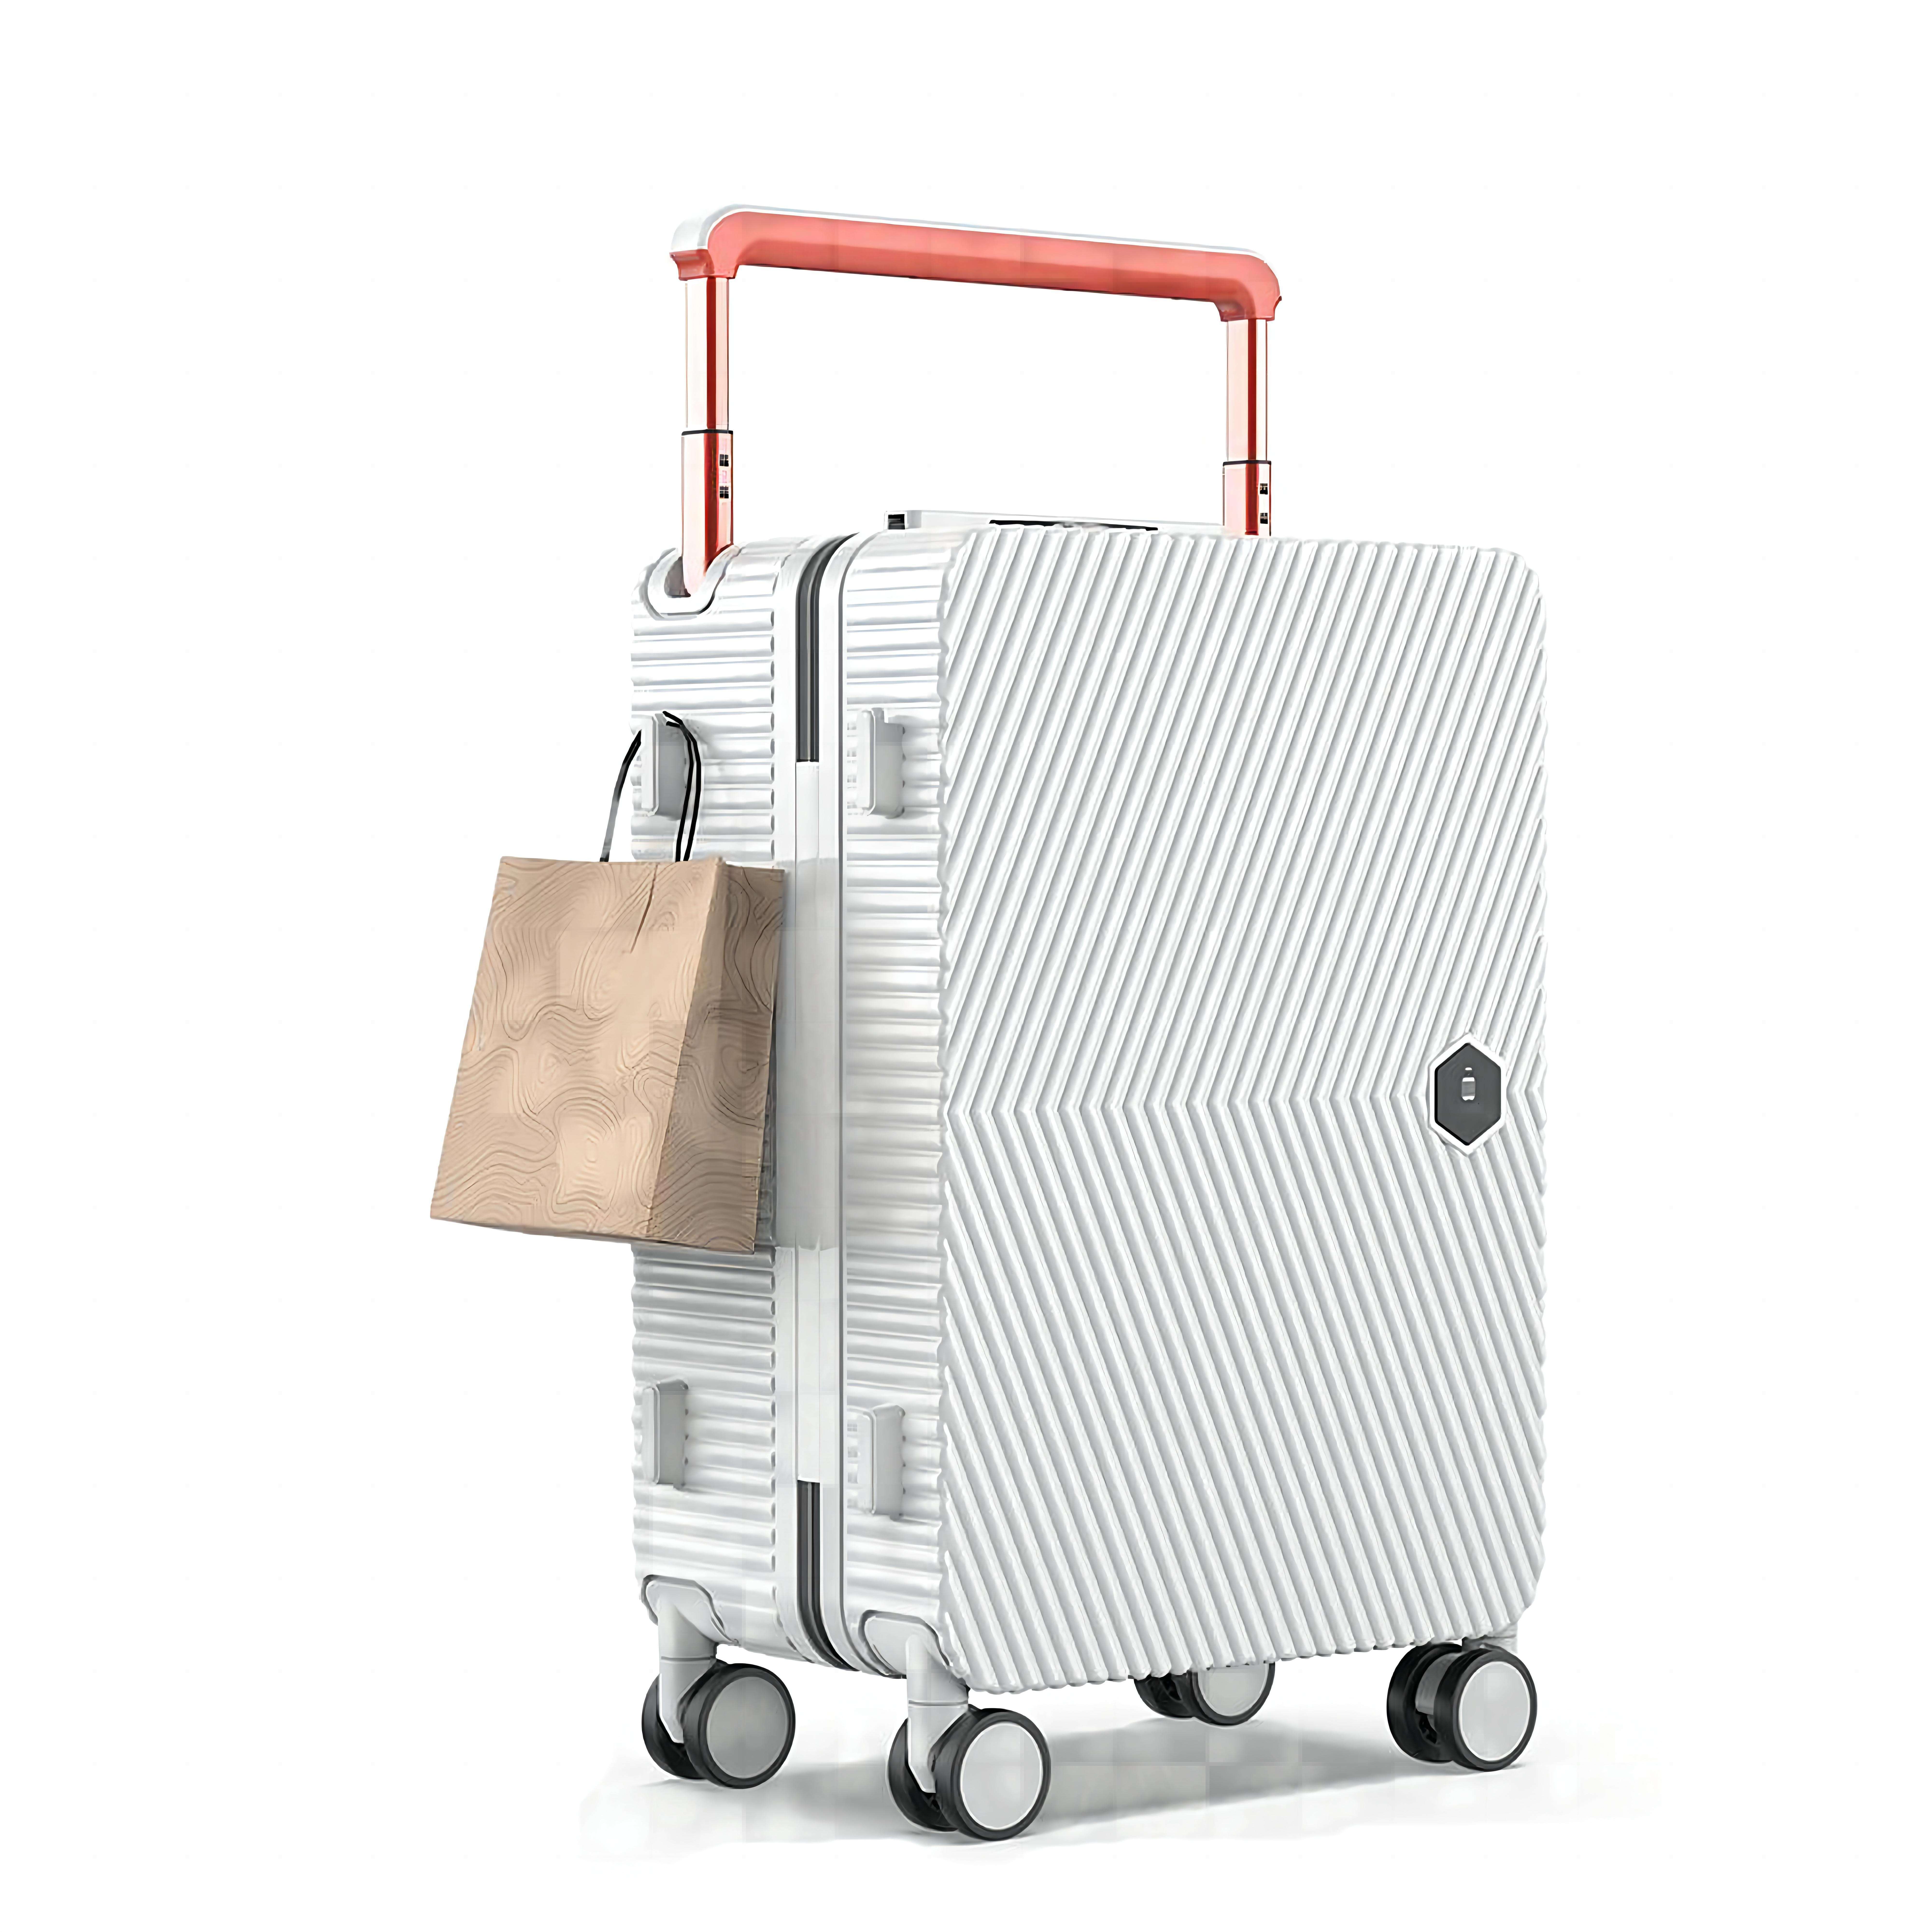 

Expandable With Double Spinner Wheels, Lightweight Overnight Suitcase, Carry-on, Built-in Tsa Lock, Travel Luggage